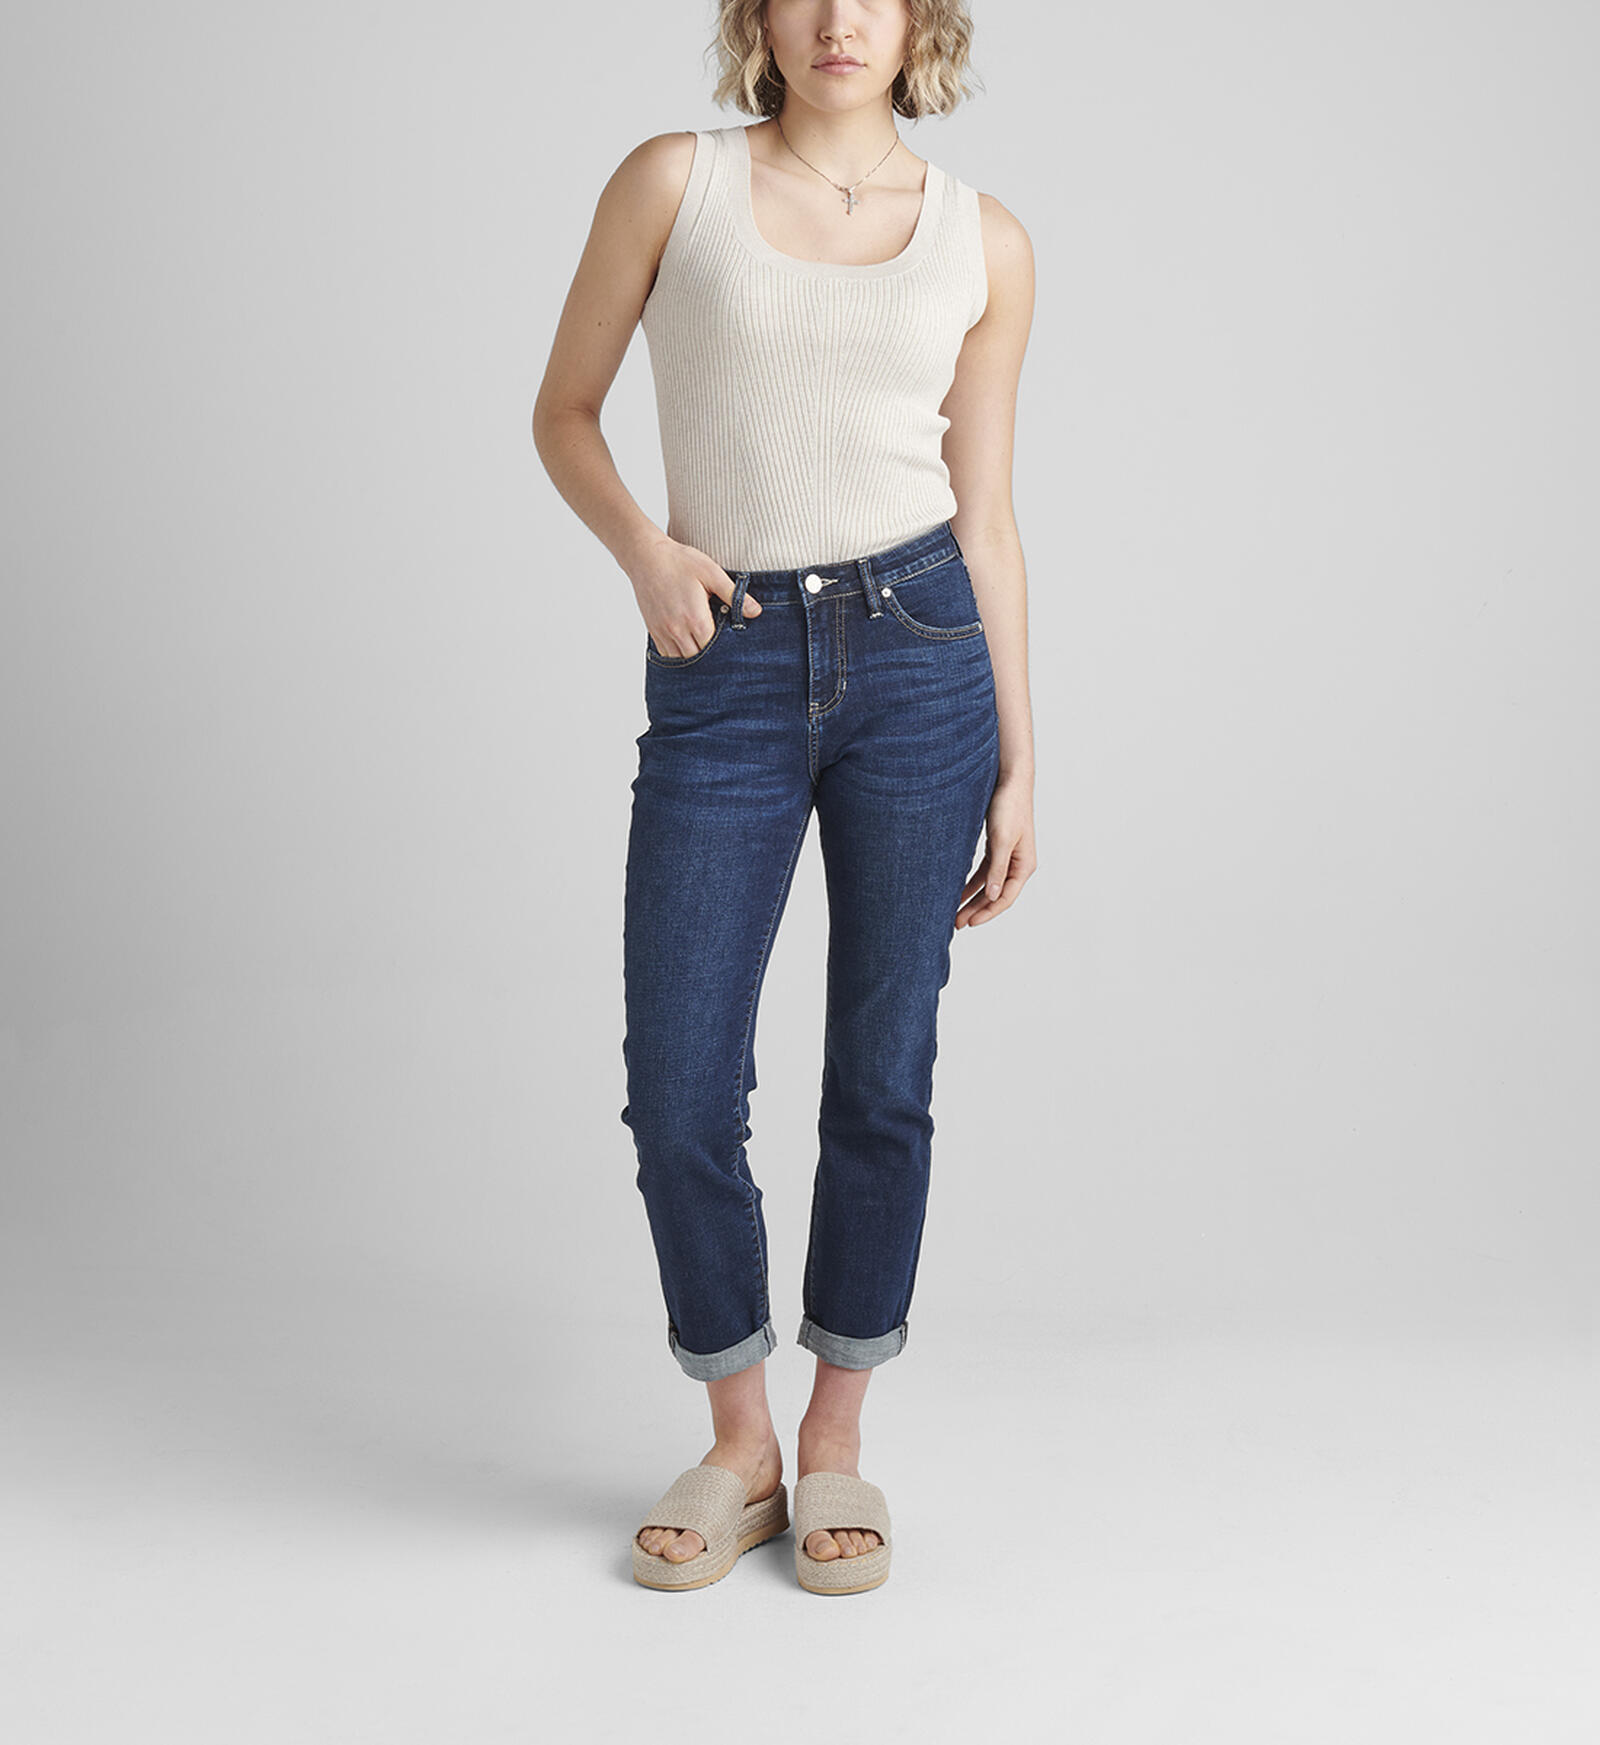 Buy Carter Mid Rise Girlfriend Jeans Petite for USD 78.00